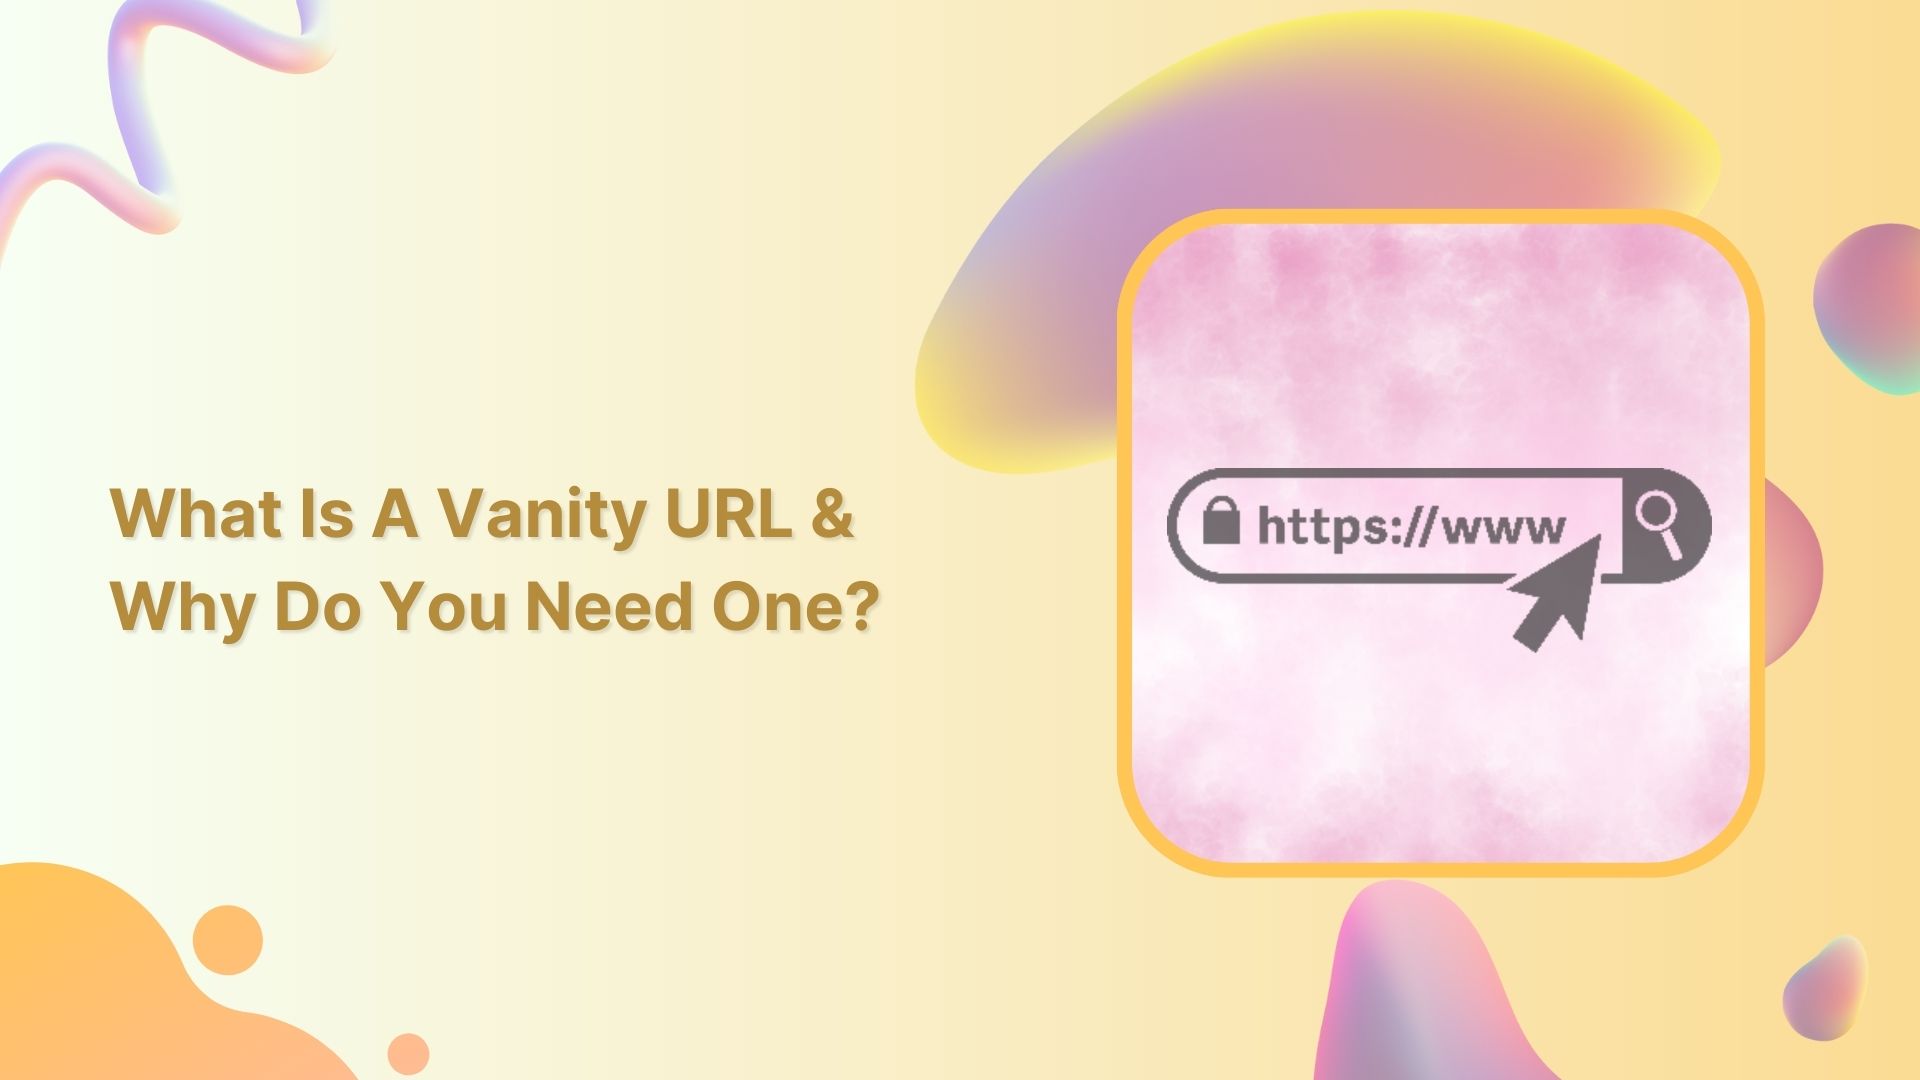 What is a Vanity URL and Why You Need One?